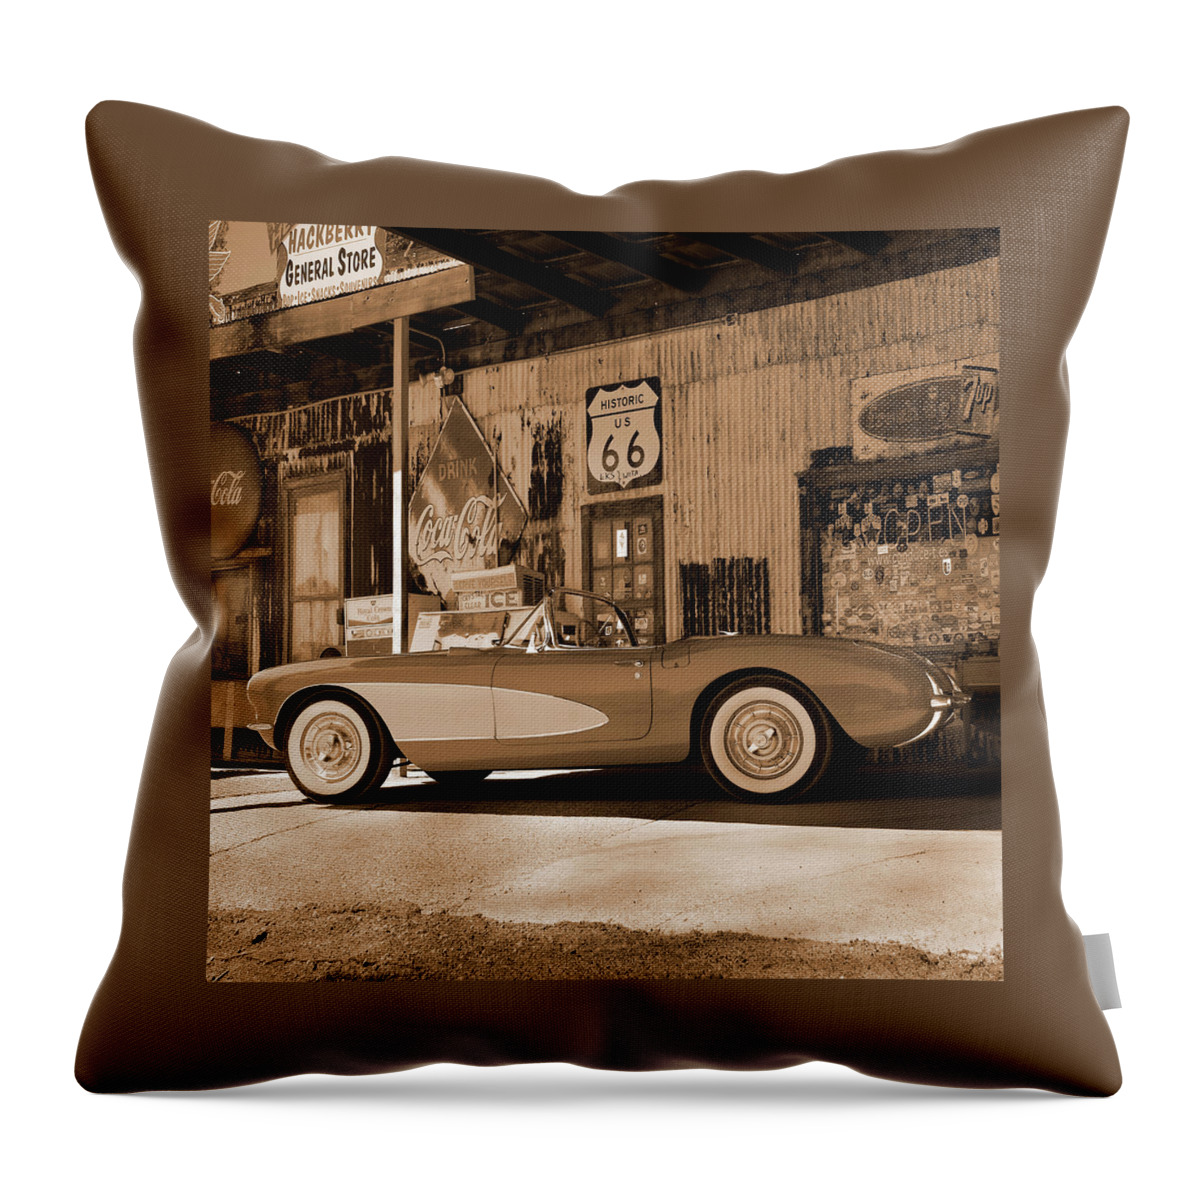  Route 66 Throw Pillow featuring the photograph Route 66 - Classic Vette by Mike McGlothlen